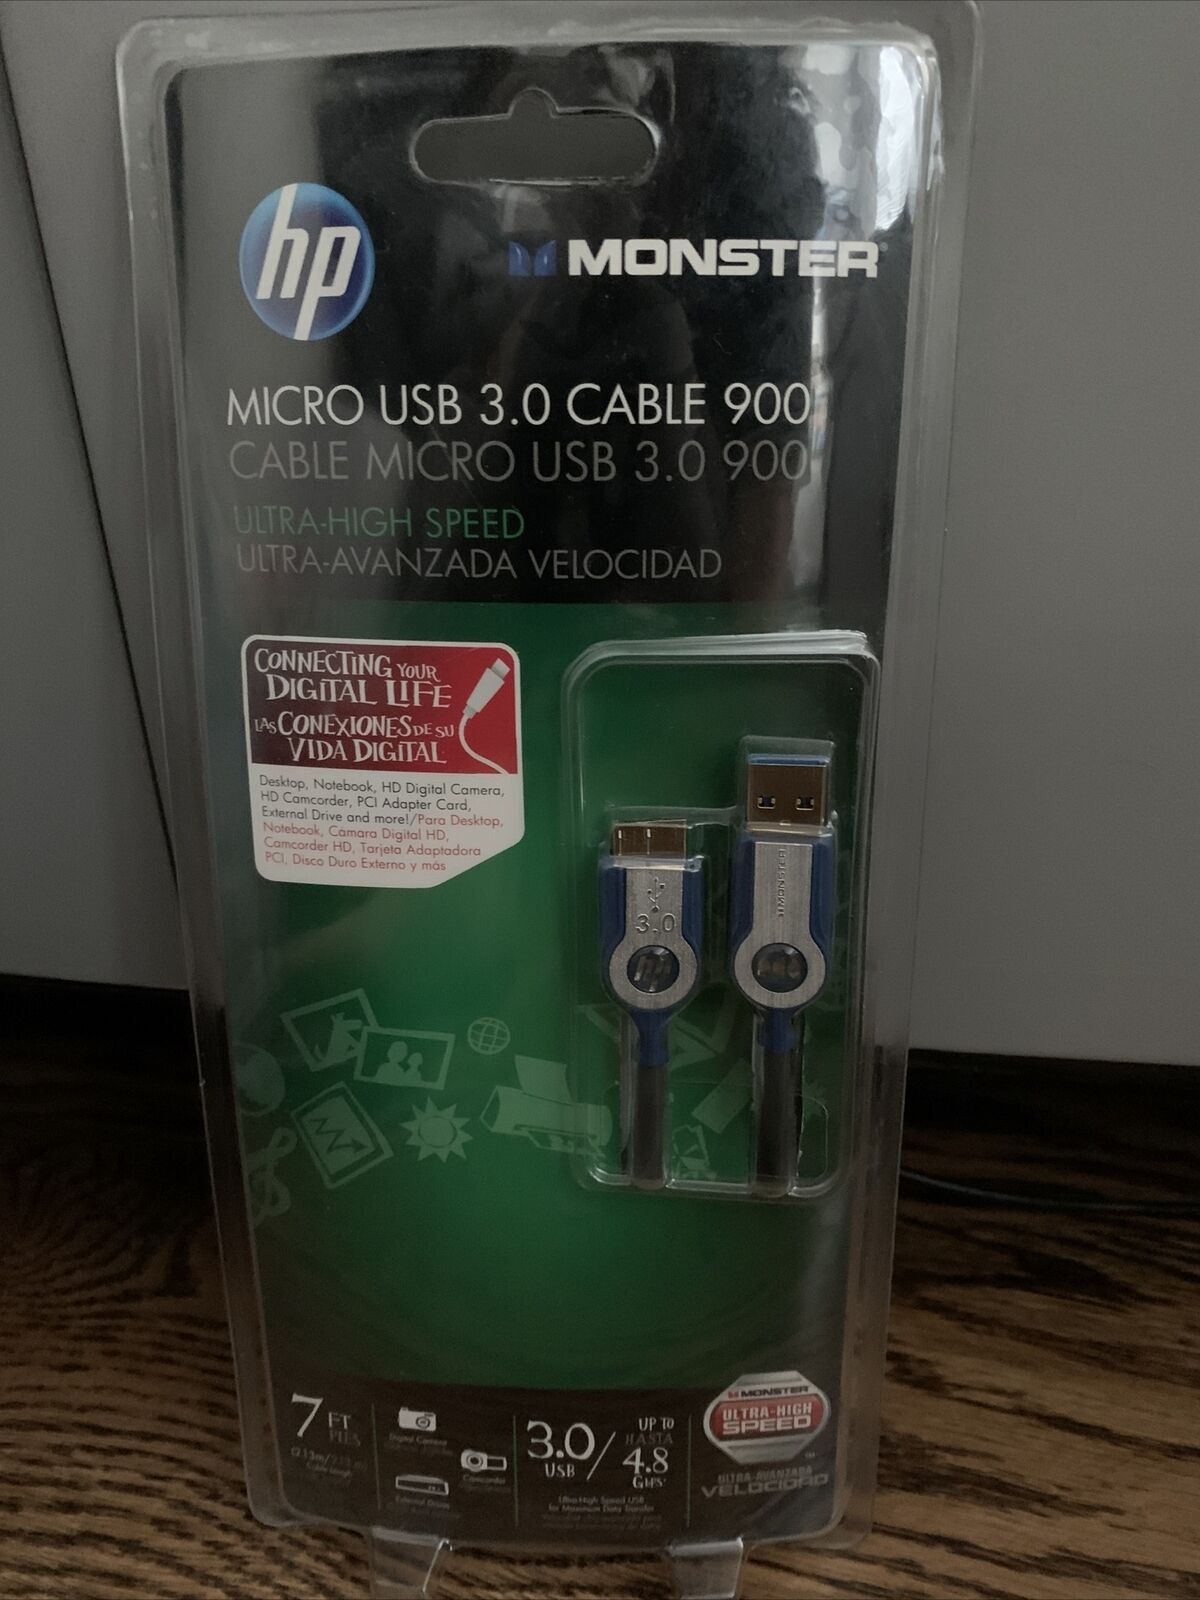 HP Monster Micro USB 3.0 Cable 900 New